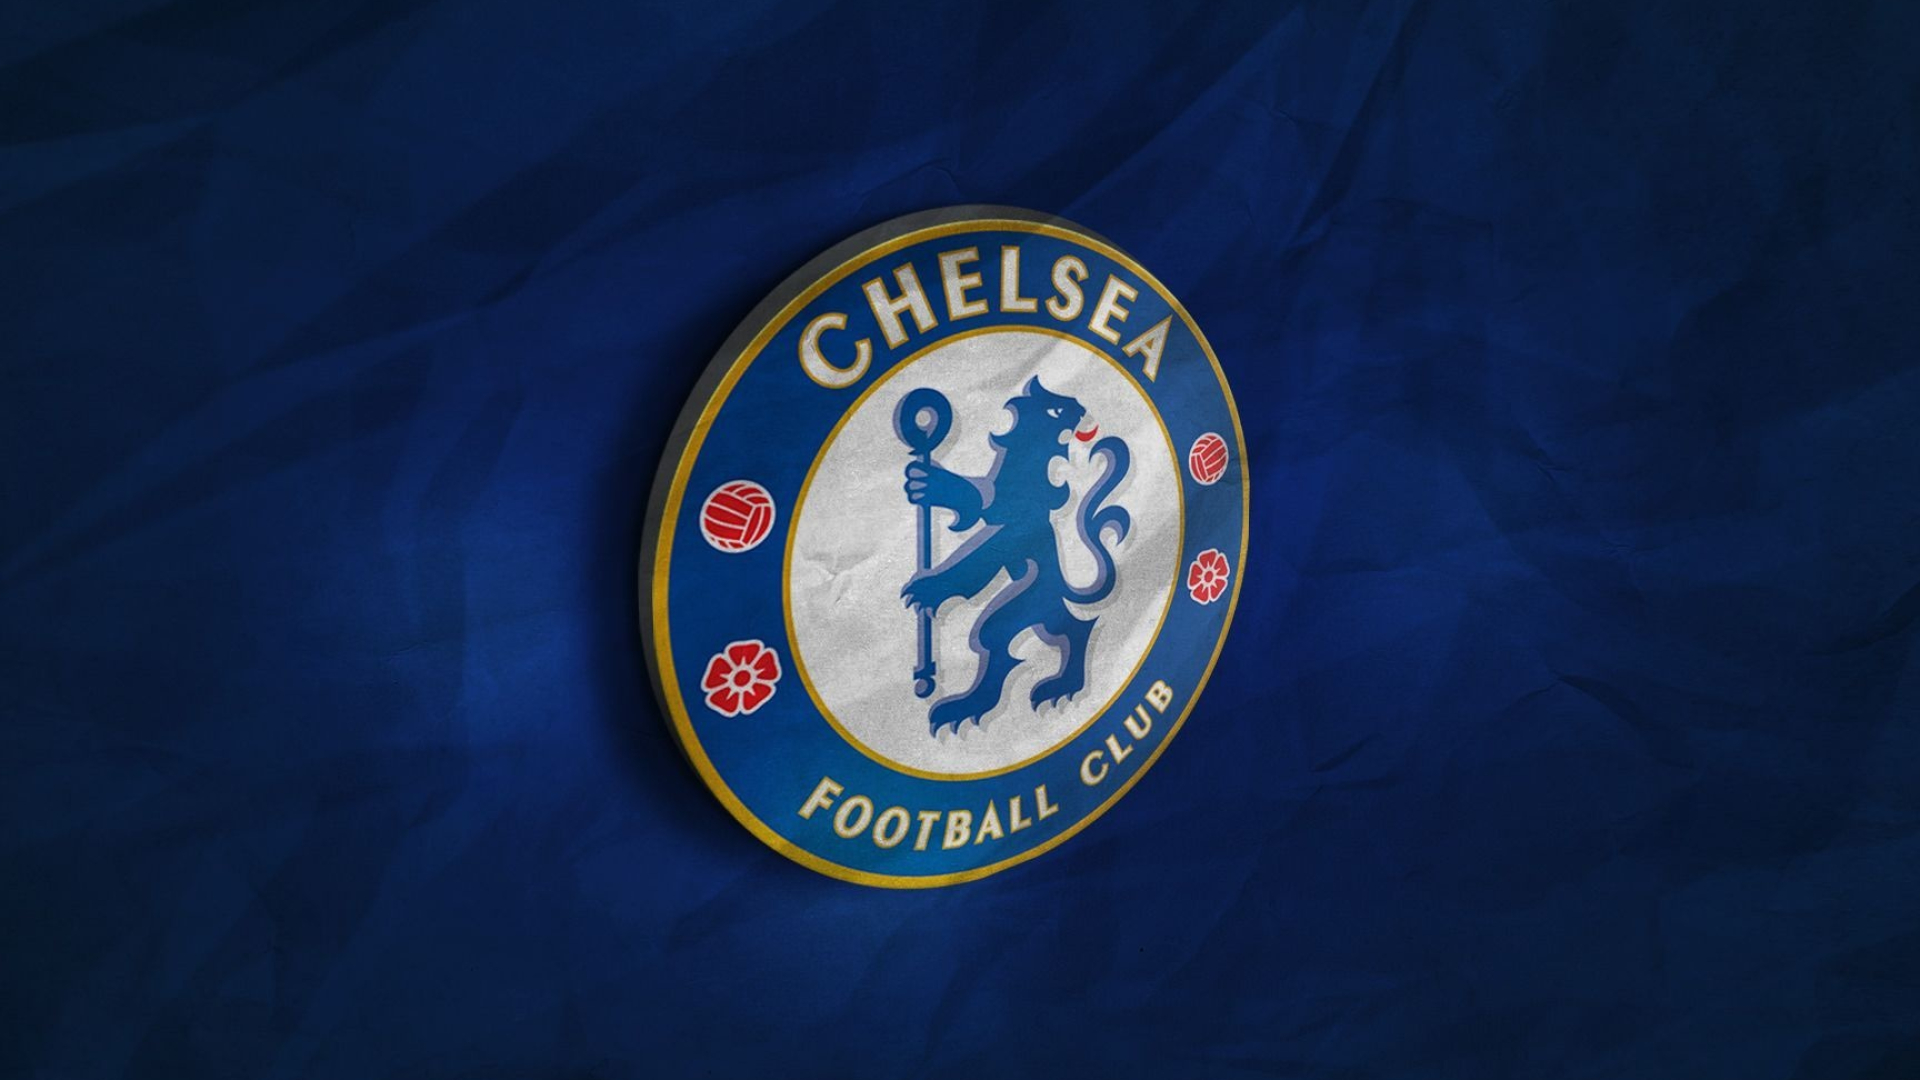 Chelsea: The club with a rich history, many successes including 5 Premier League titles. 1920x1080 Full HD Wallpaper.